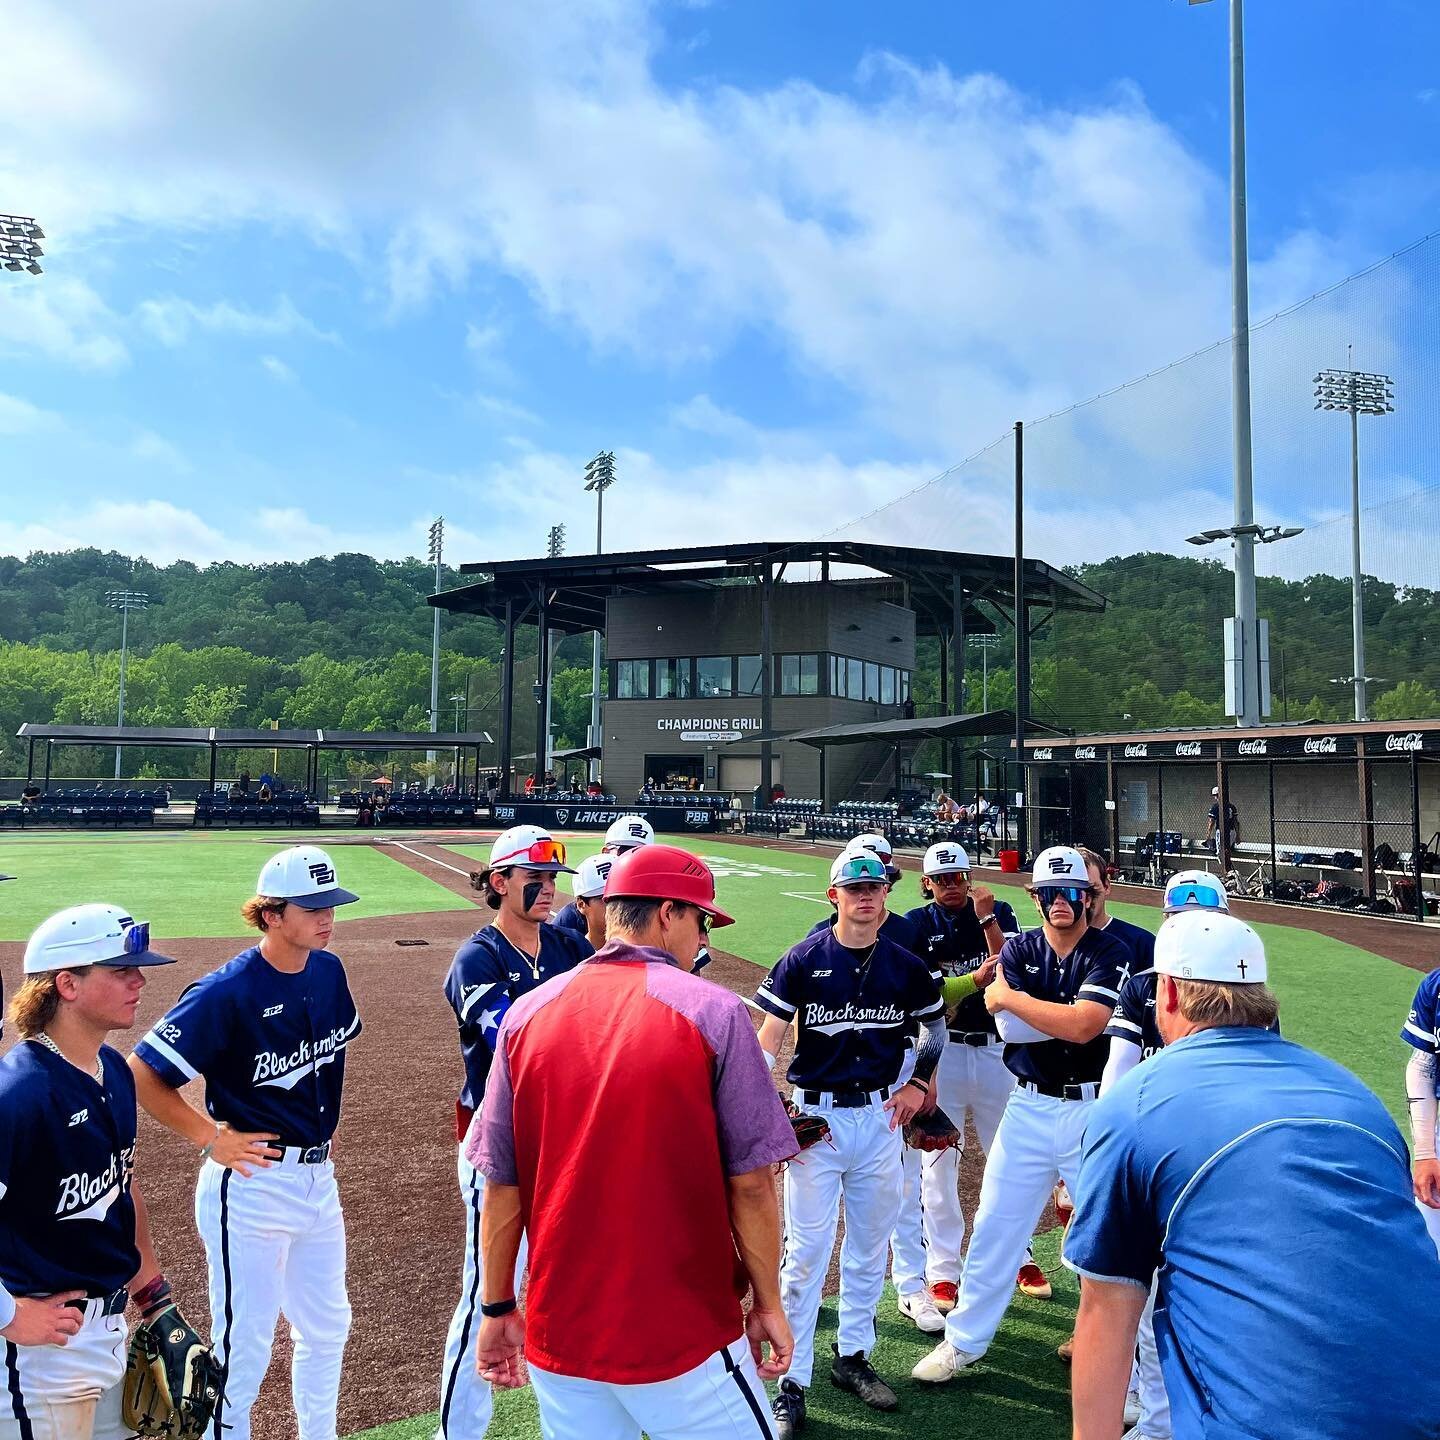 First day is underway at the @naaconference tournament. 💪 We will be updating our game stats on Twitter and our stories at the end of each day! 

#p27blacksmiths #p27baseballacademy